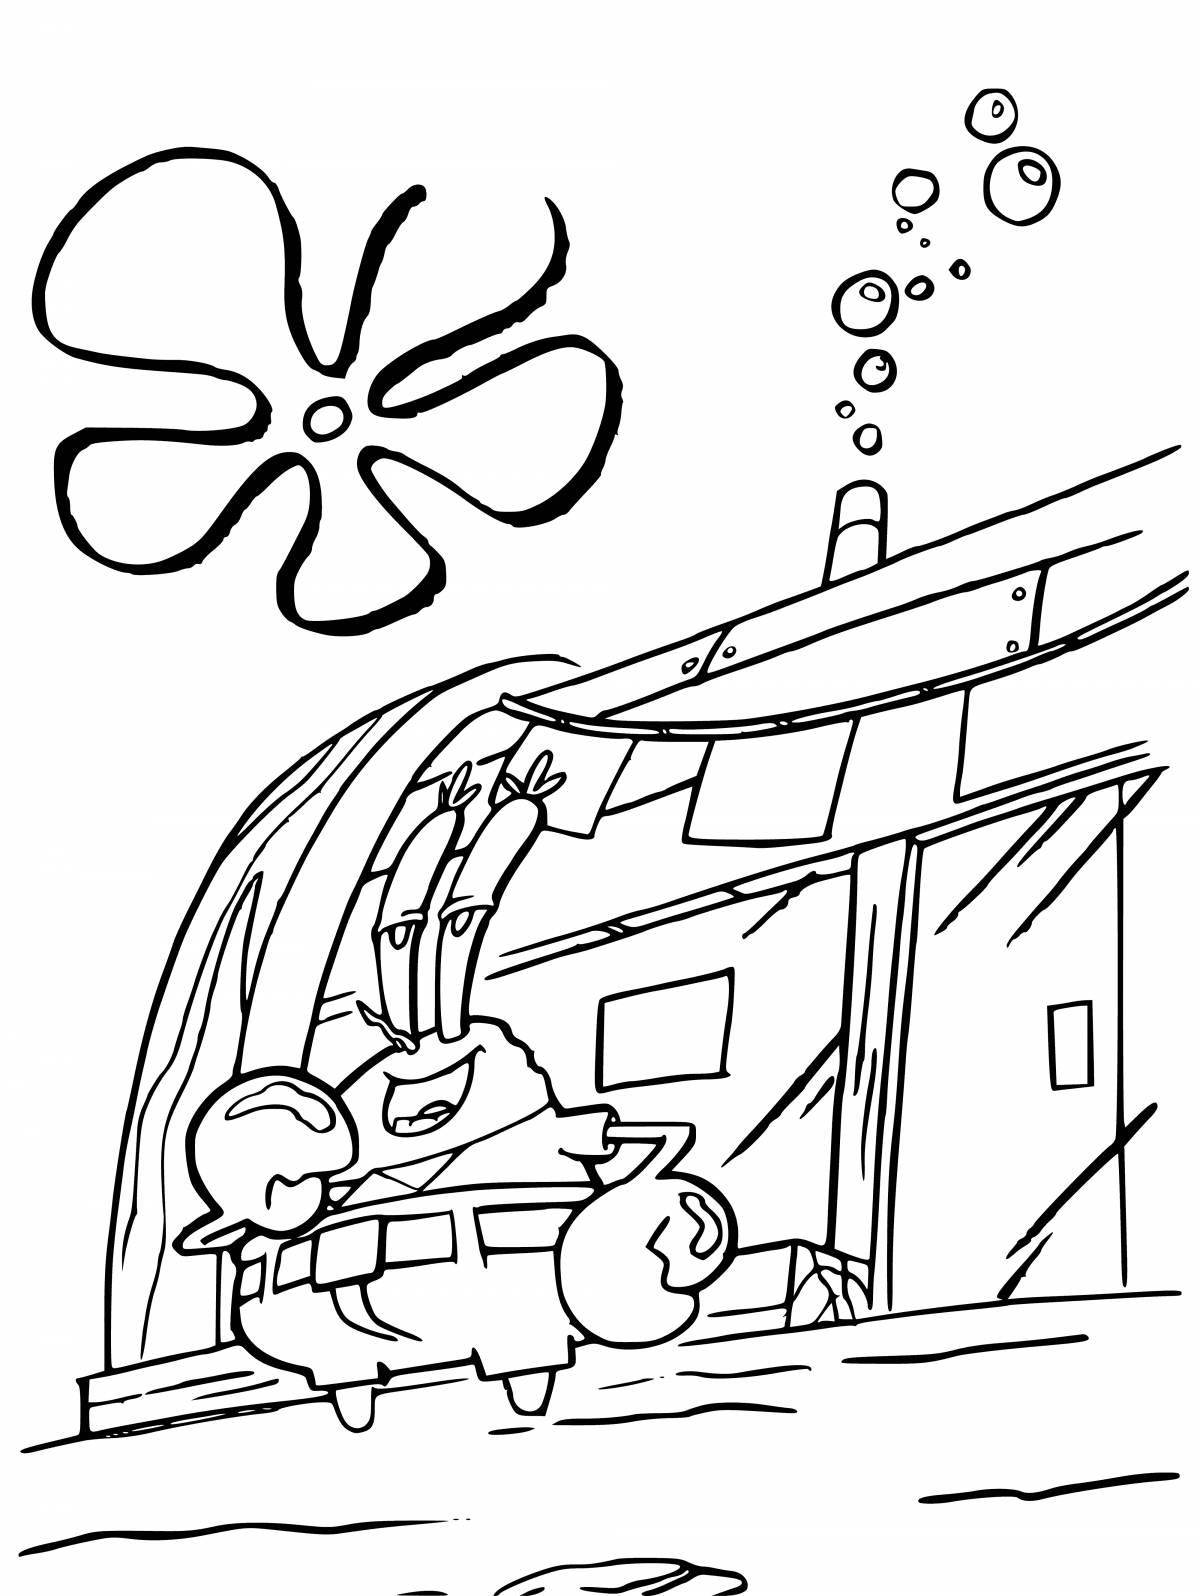 Spongebob's living house coloring page